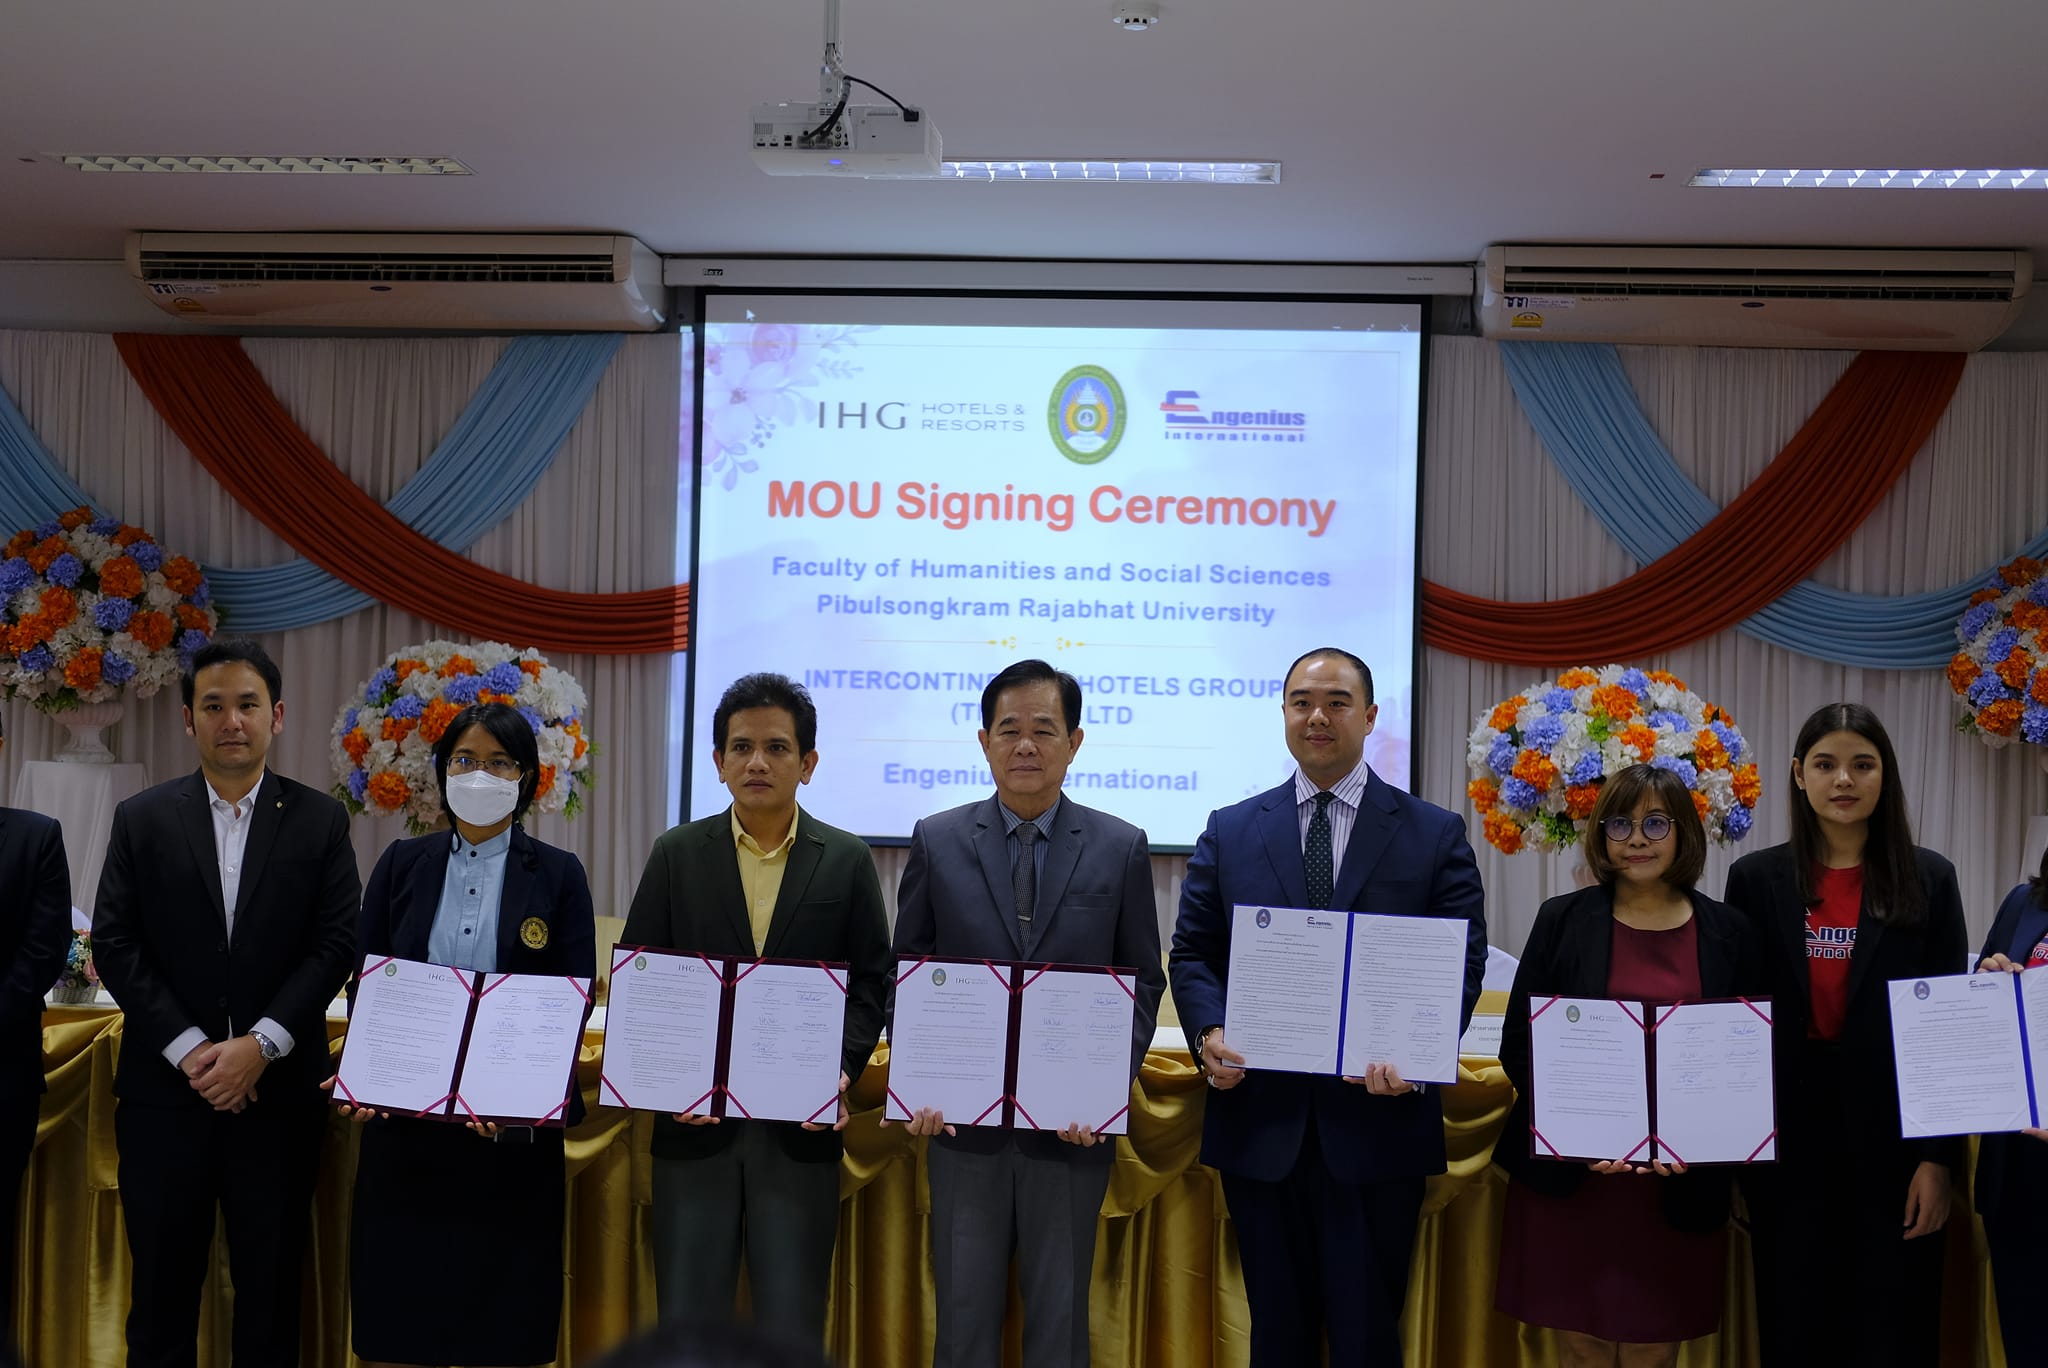 MOU Signing Ceremony; Faculty of Humanities and Social Sciences Pibulsongkram Rajabhat University